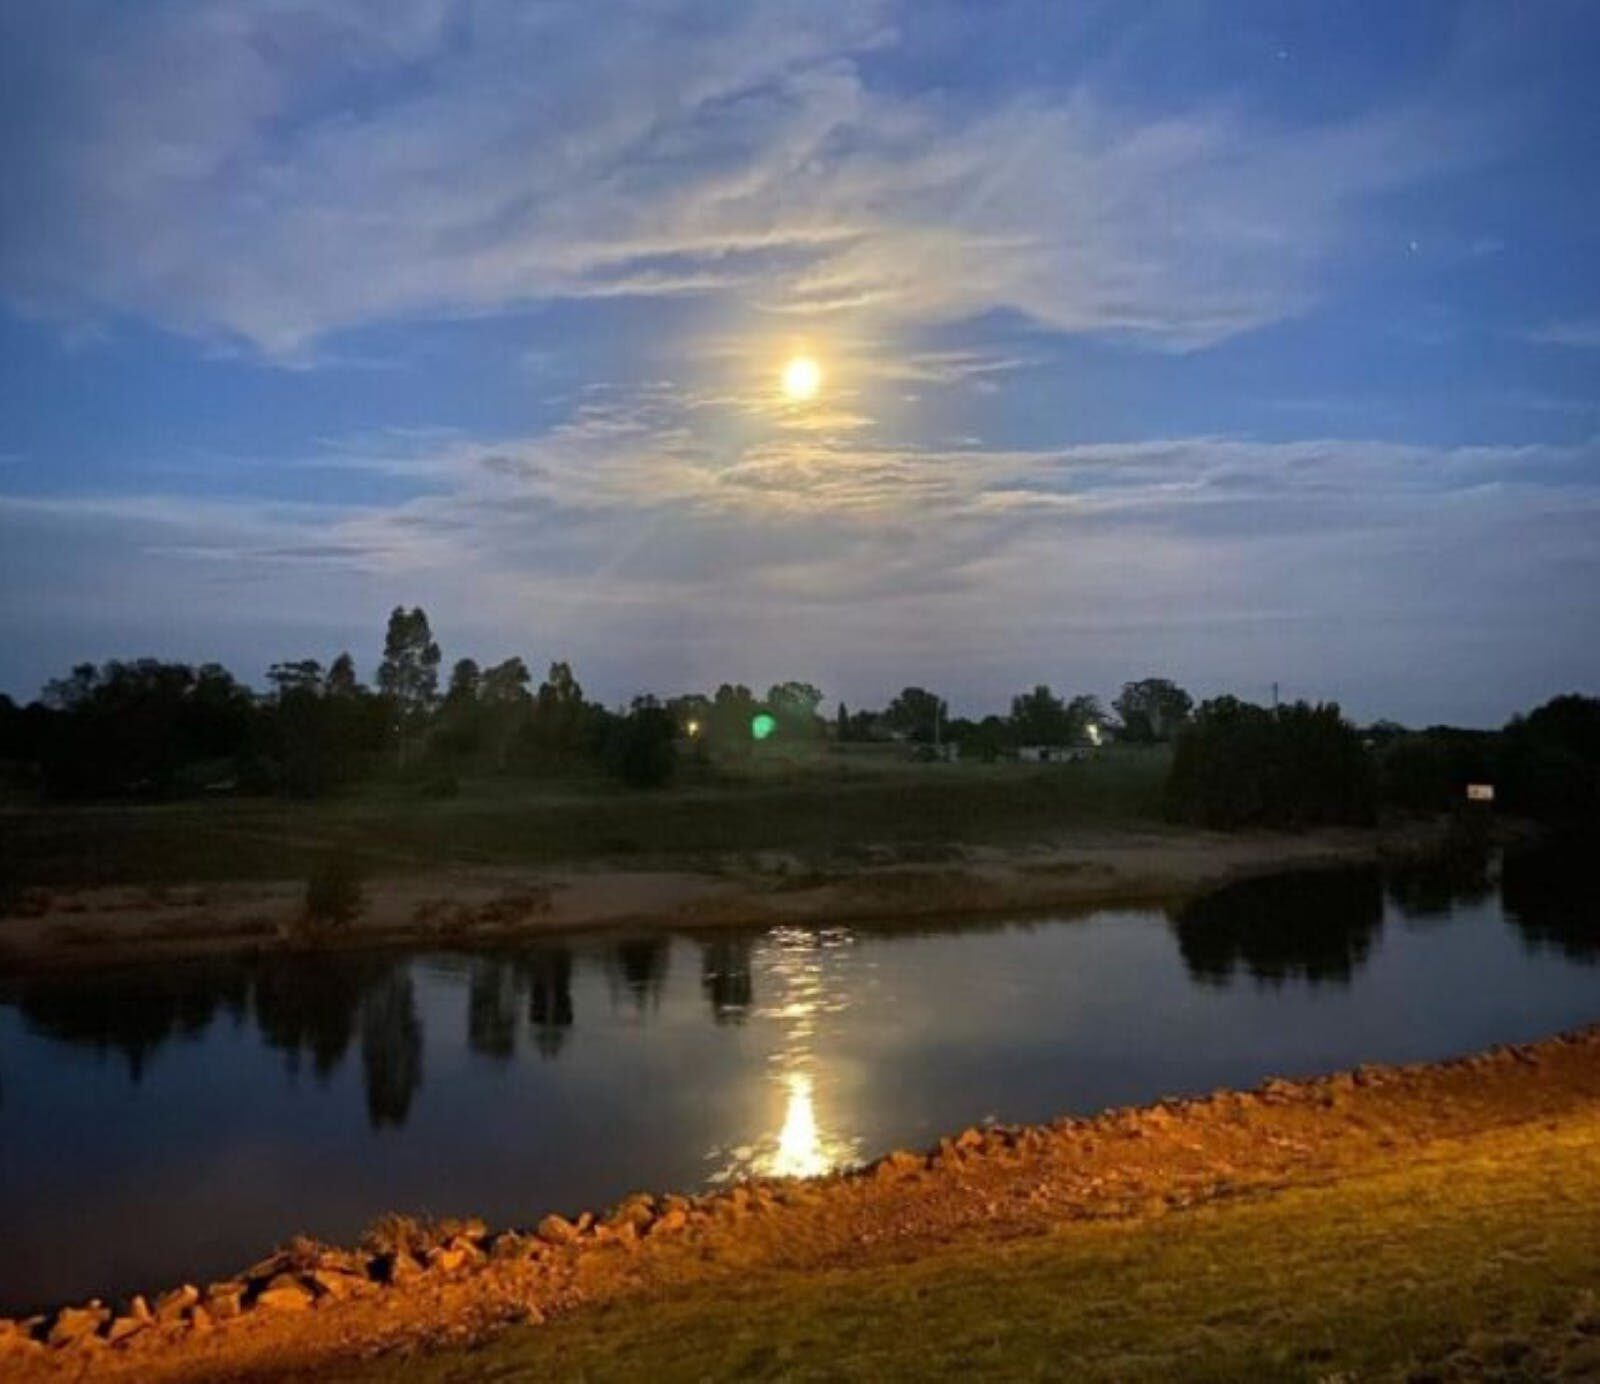 A river with a body of water and a moon in the sky